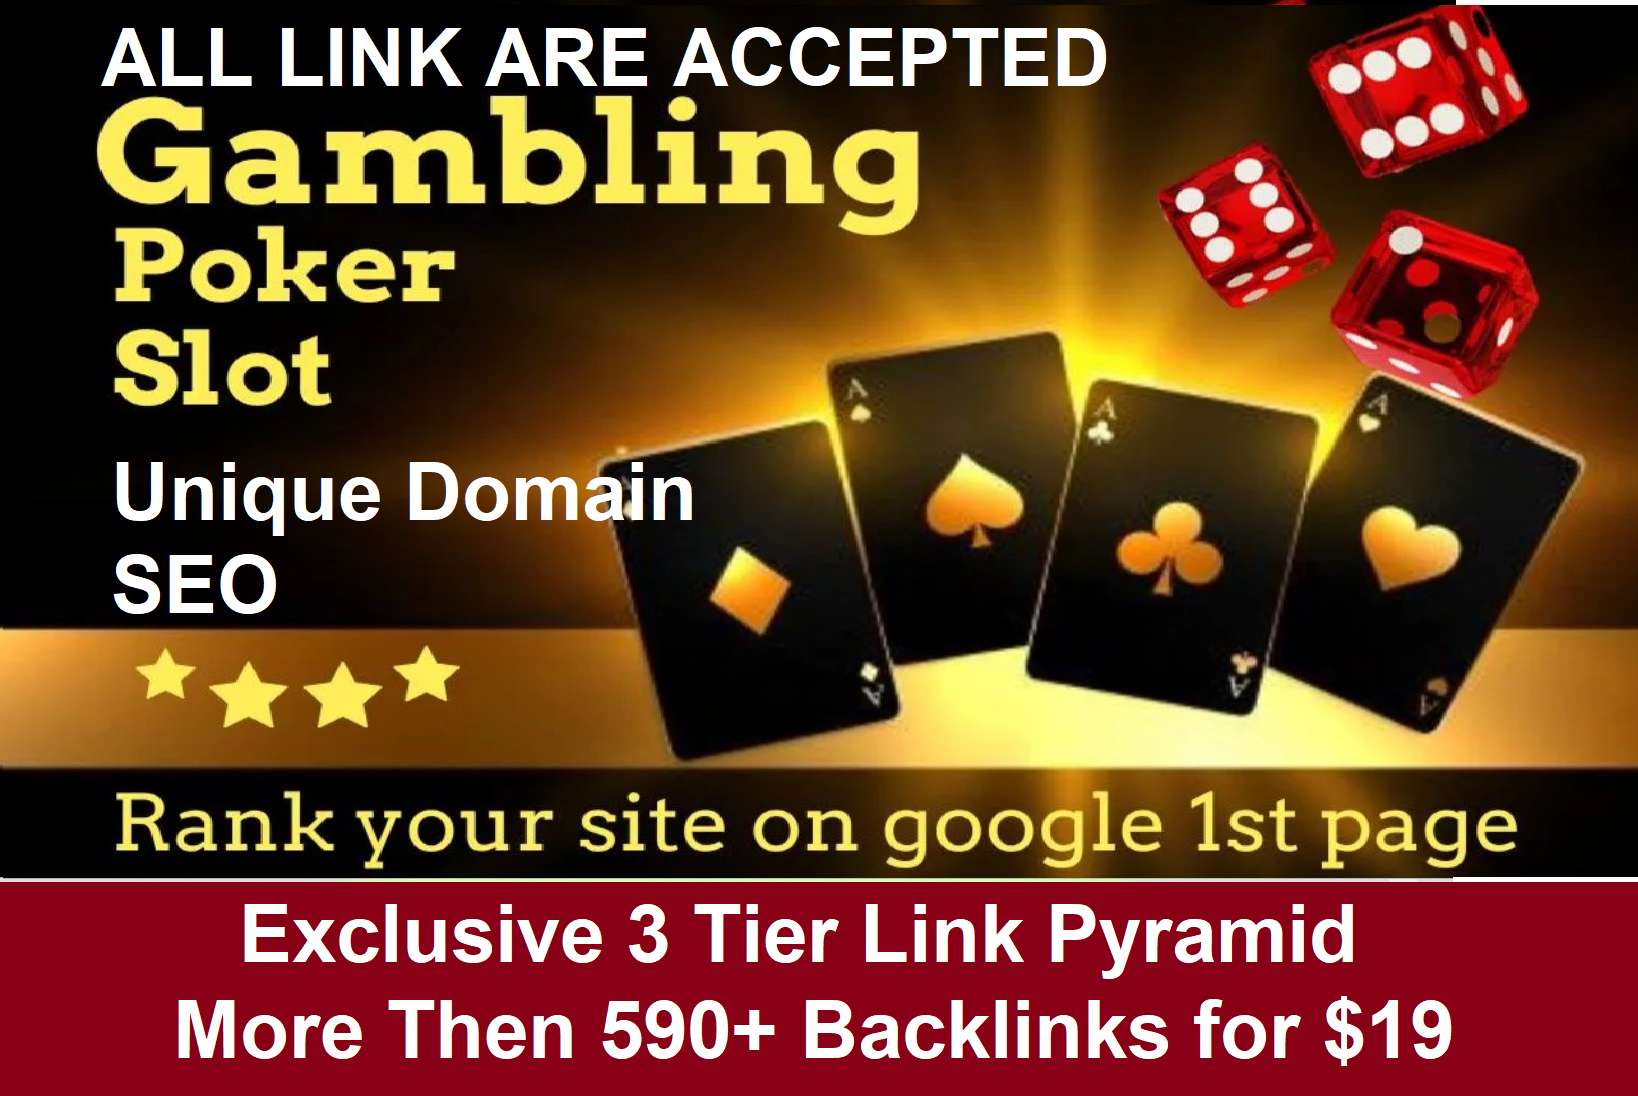 Rank Your Website Higher on Google With Exclusive 3 Tier Link Pyramids Services